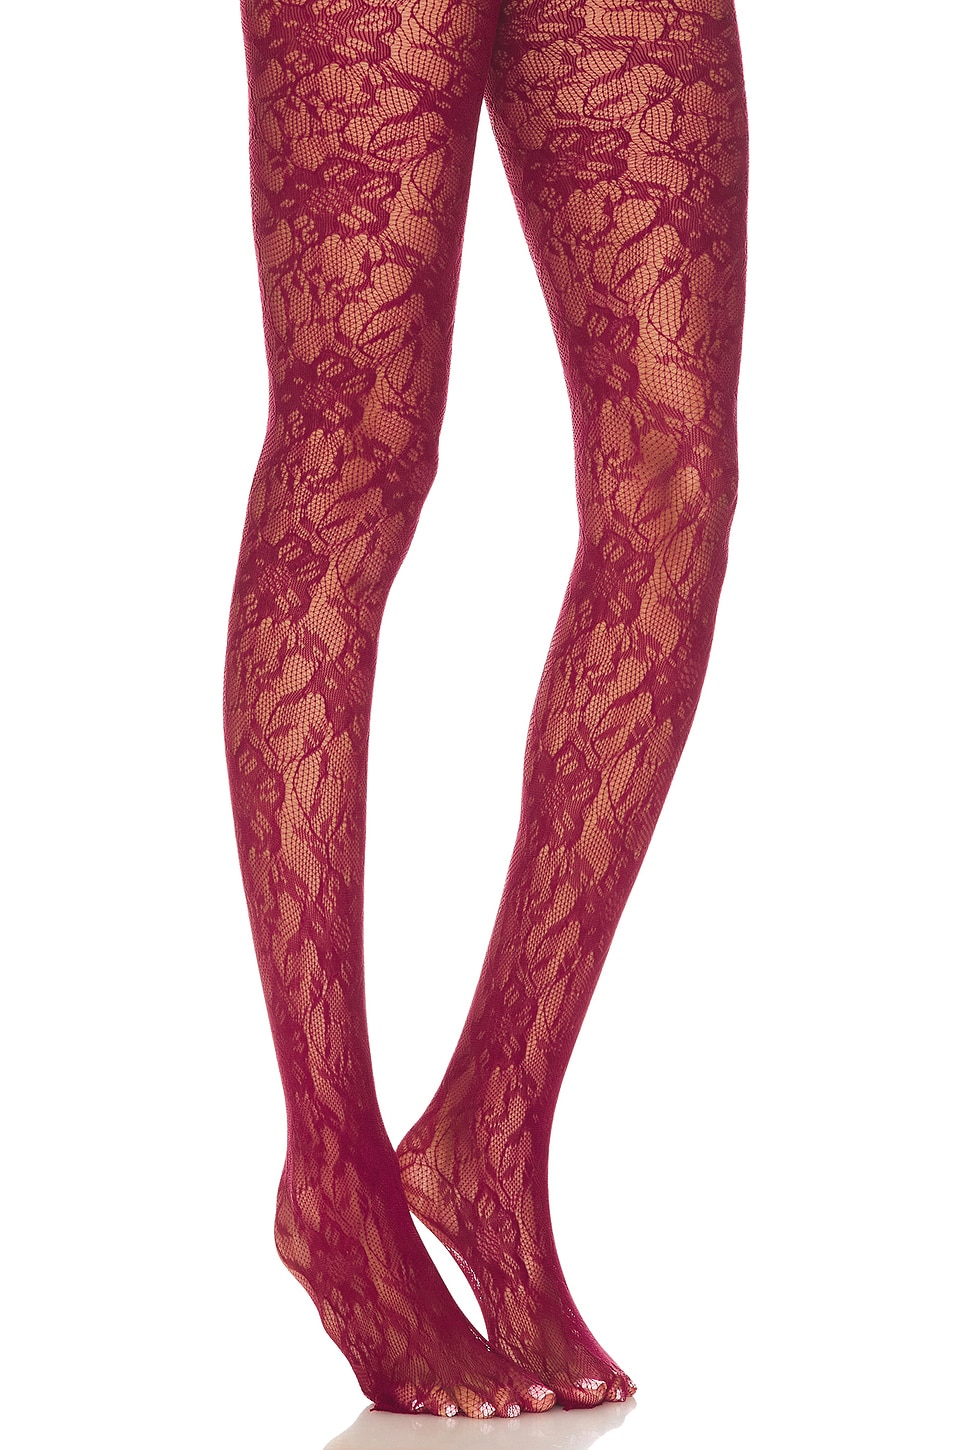 petit moments Lace Tights in Burgundy